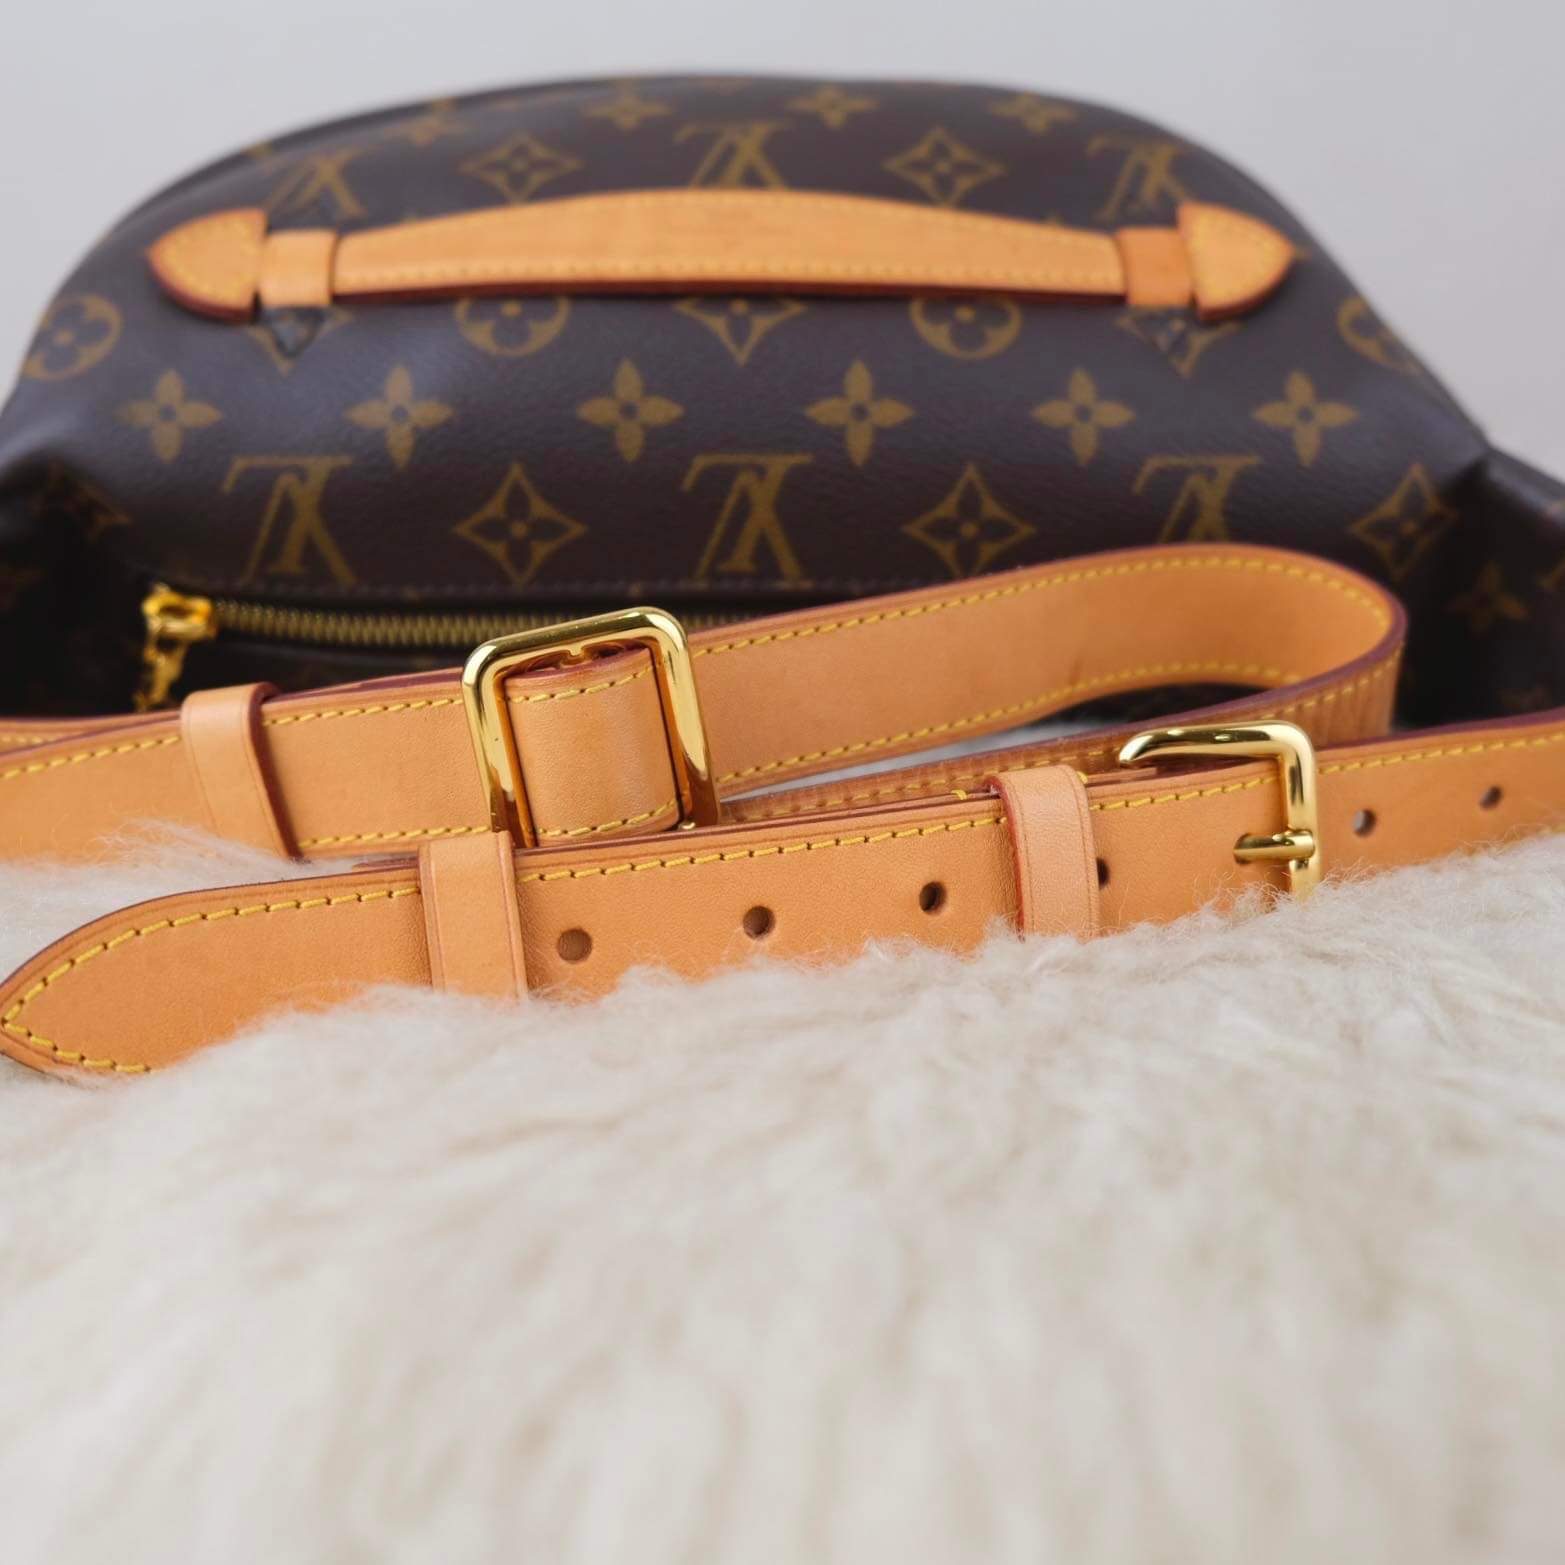 Louis Vuitton Monogram Bum Bag - In Great Condition - One Savvy